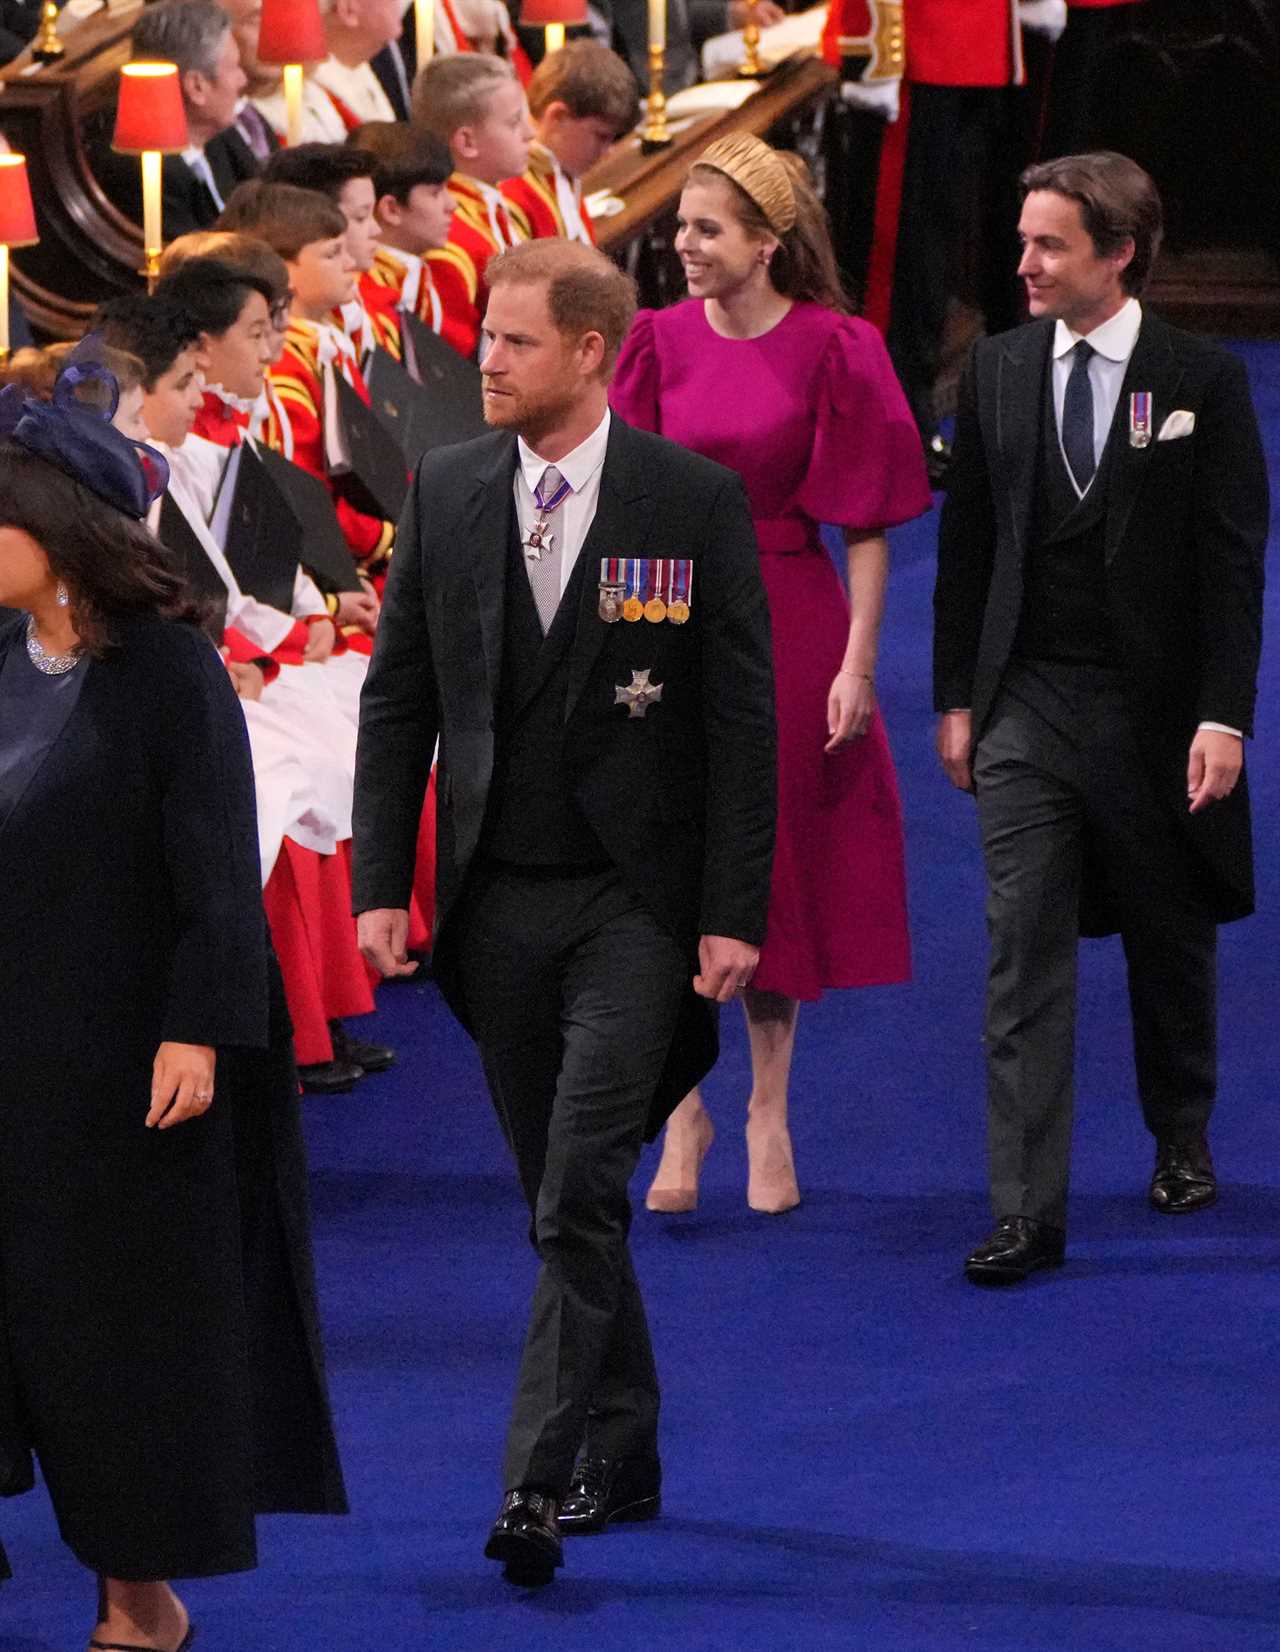 Prince Harry smiles despite sitting in third row after arriving separately from brother William at dad’s coronation